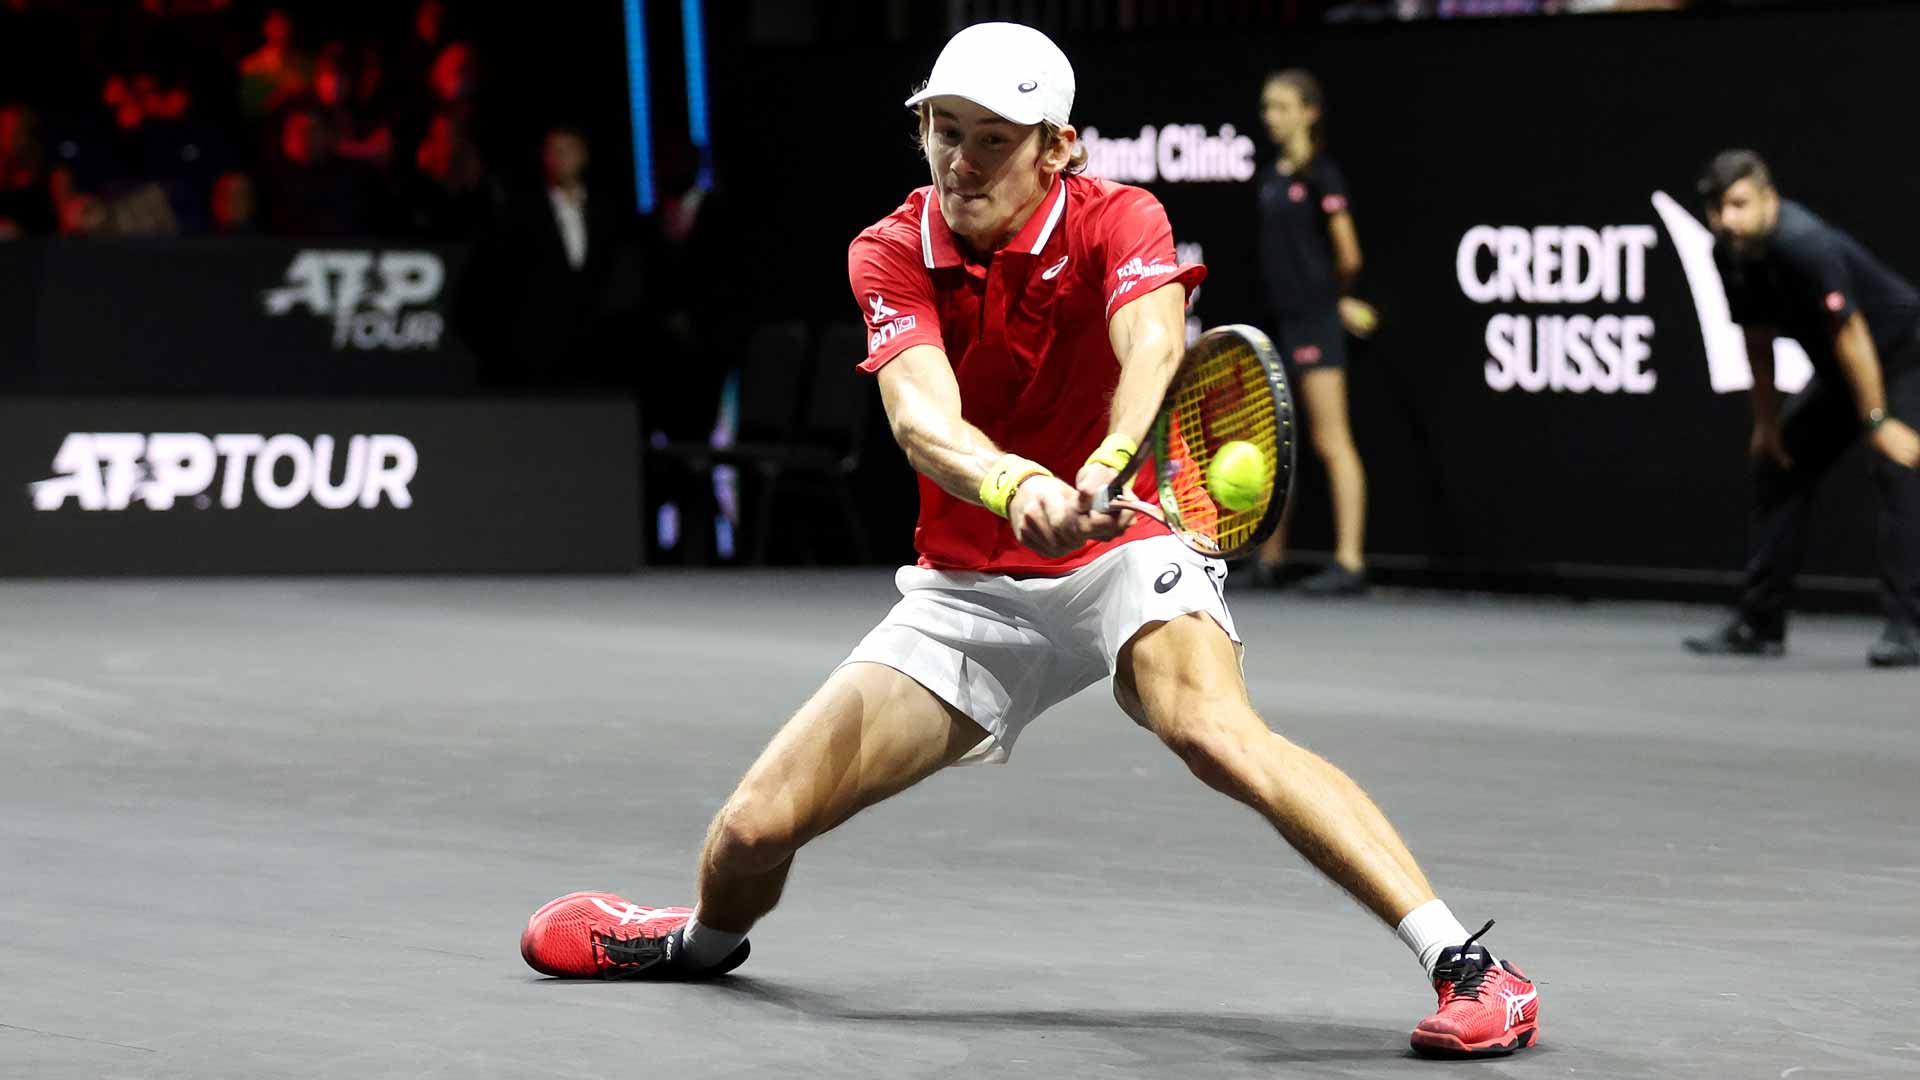 Alex de Minaur will represent Team World as they aim for their third consecutive Laver Cup title in September.